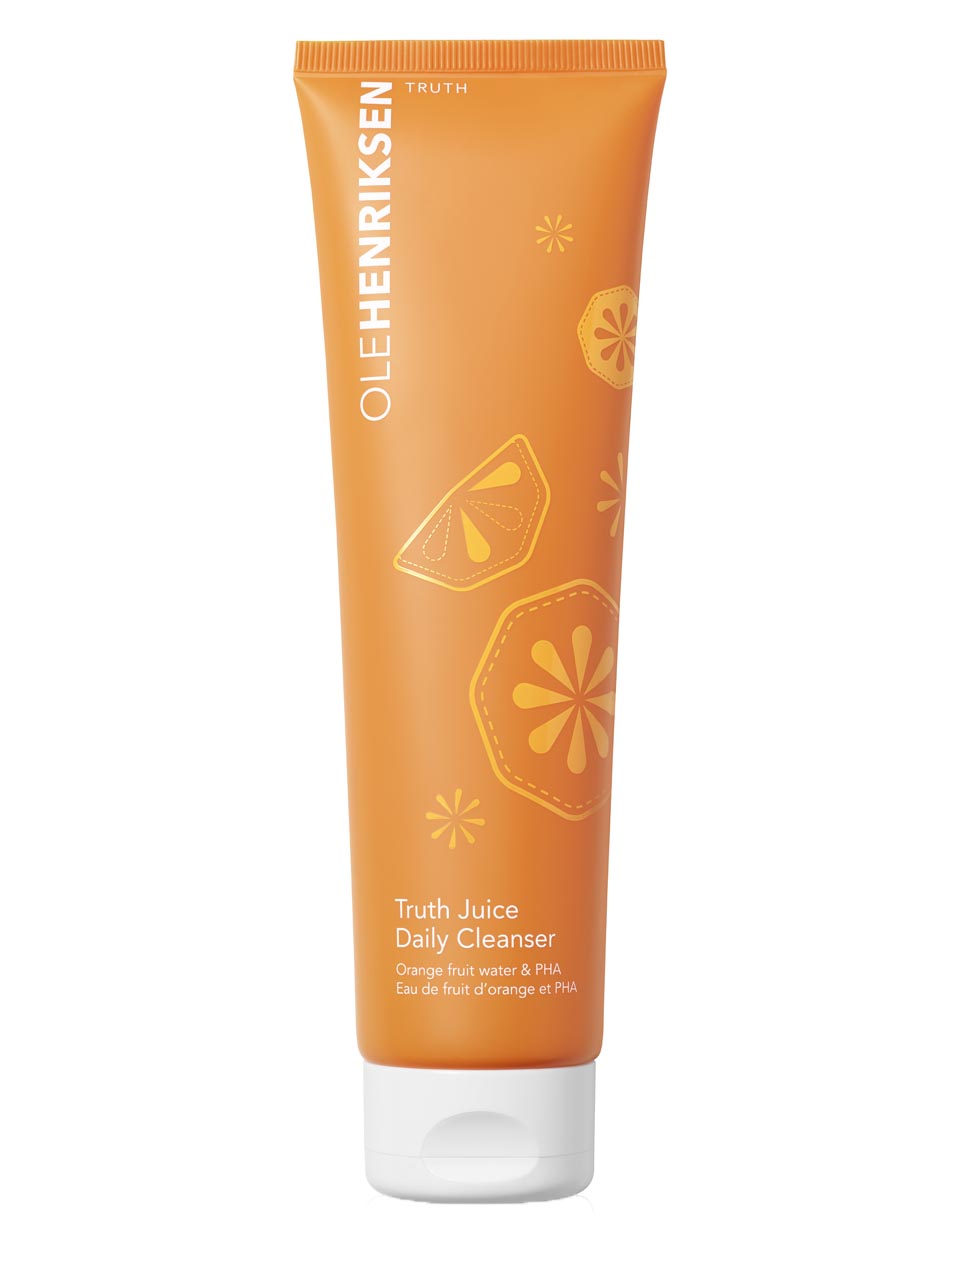 Ole Henriksen Truth Juice Daily Cleanser 150 ml null - onesize - 1